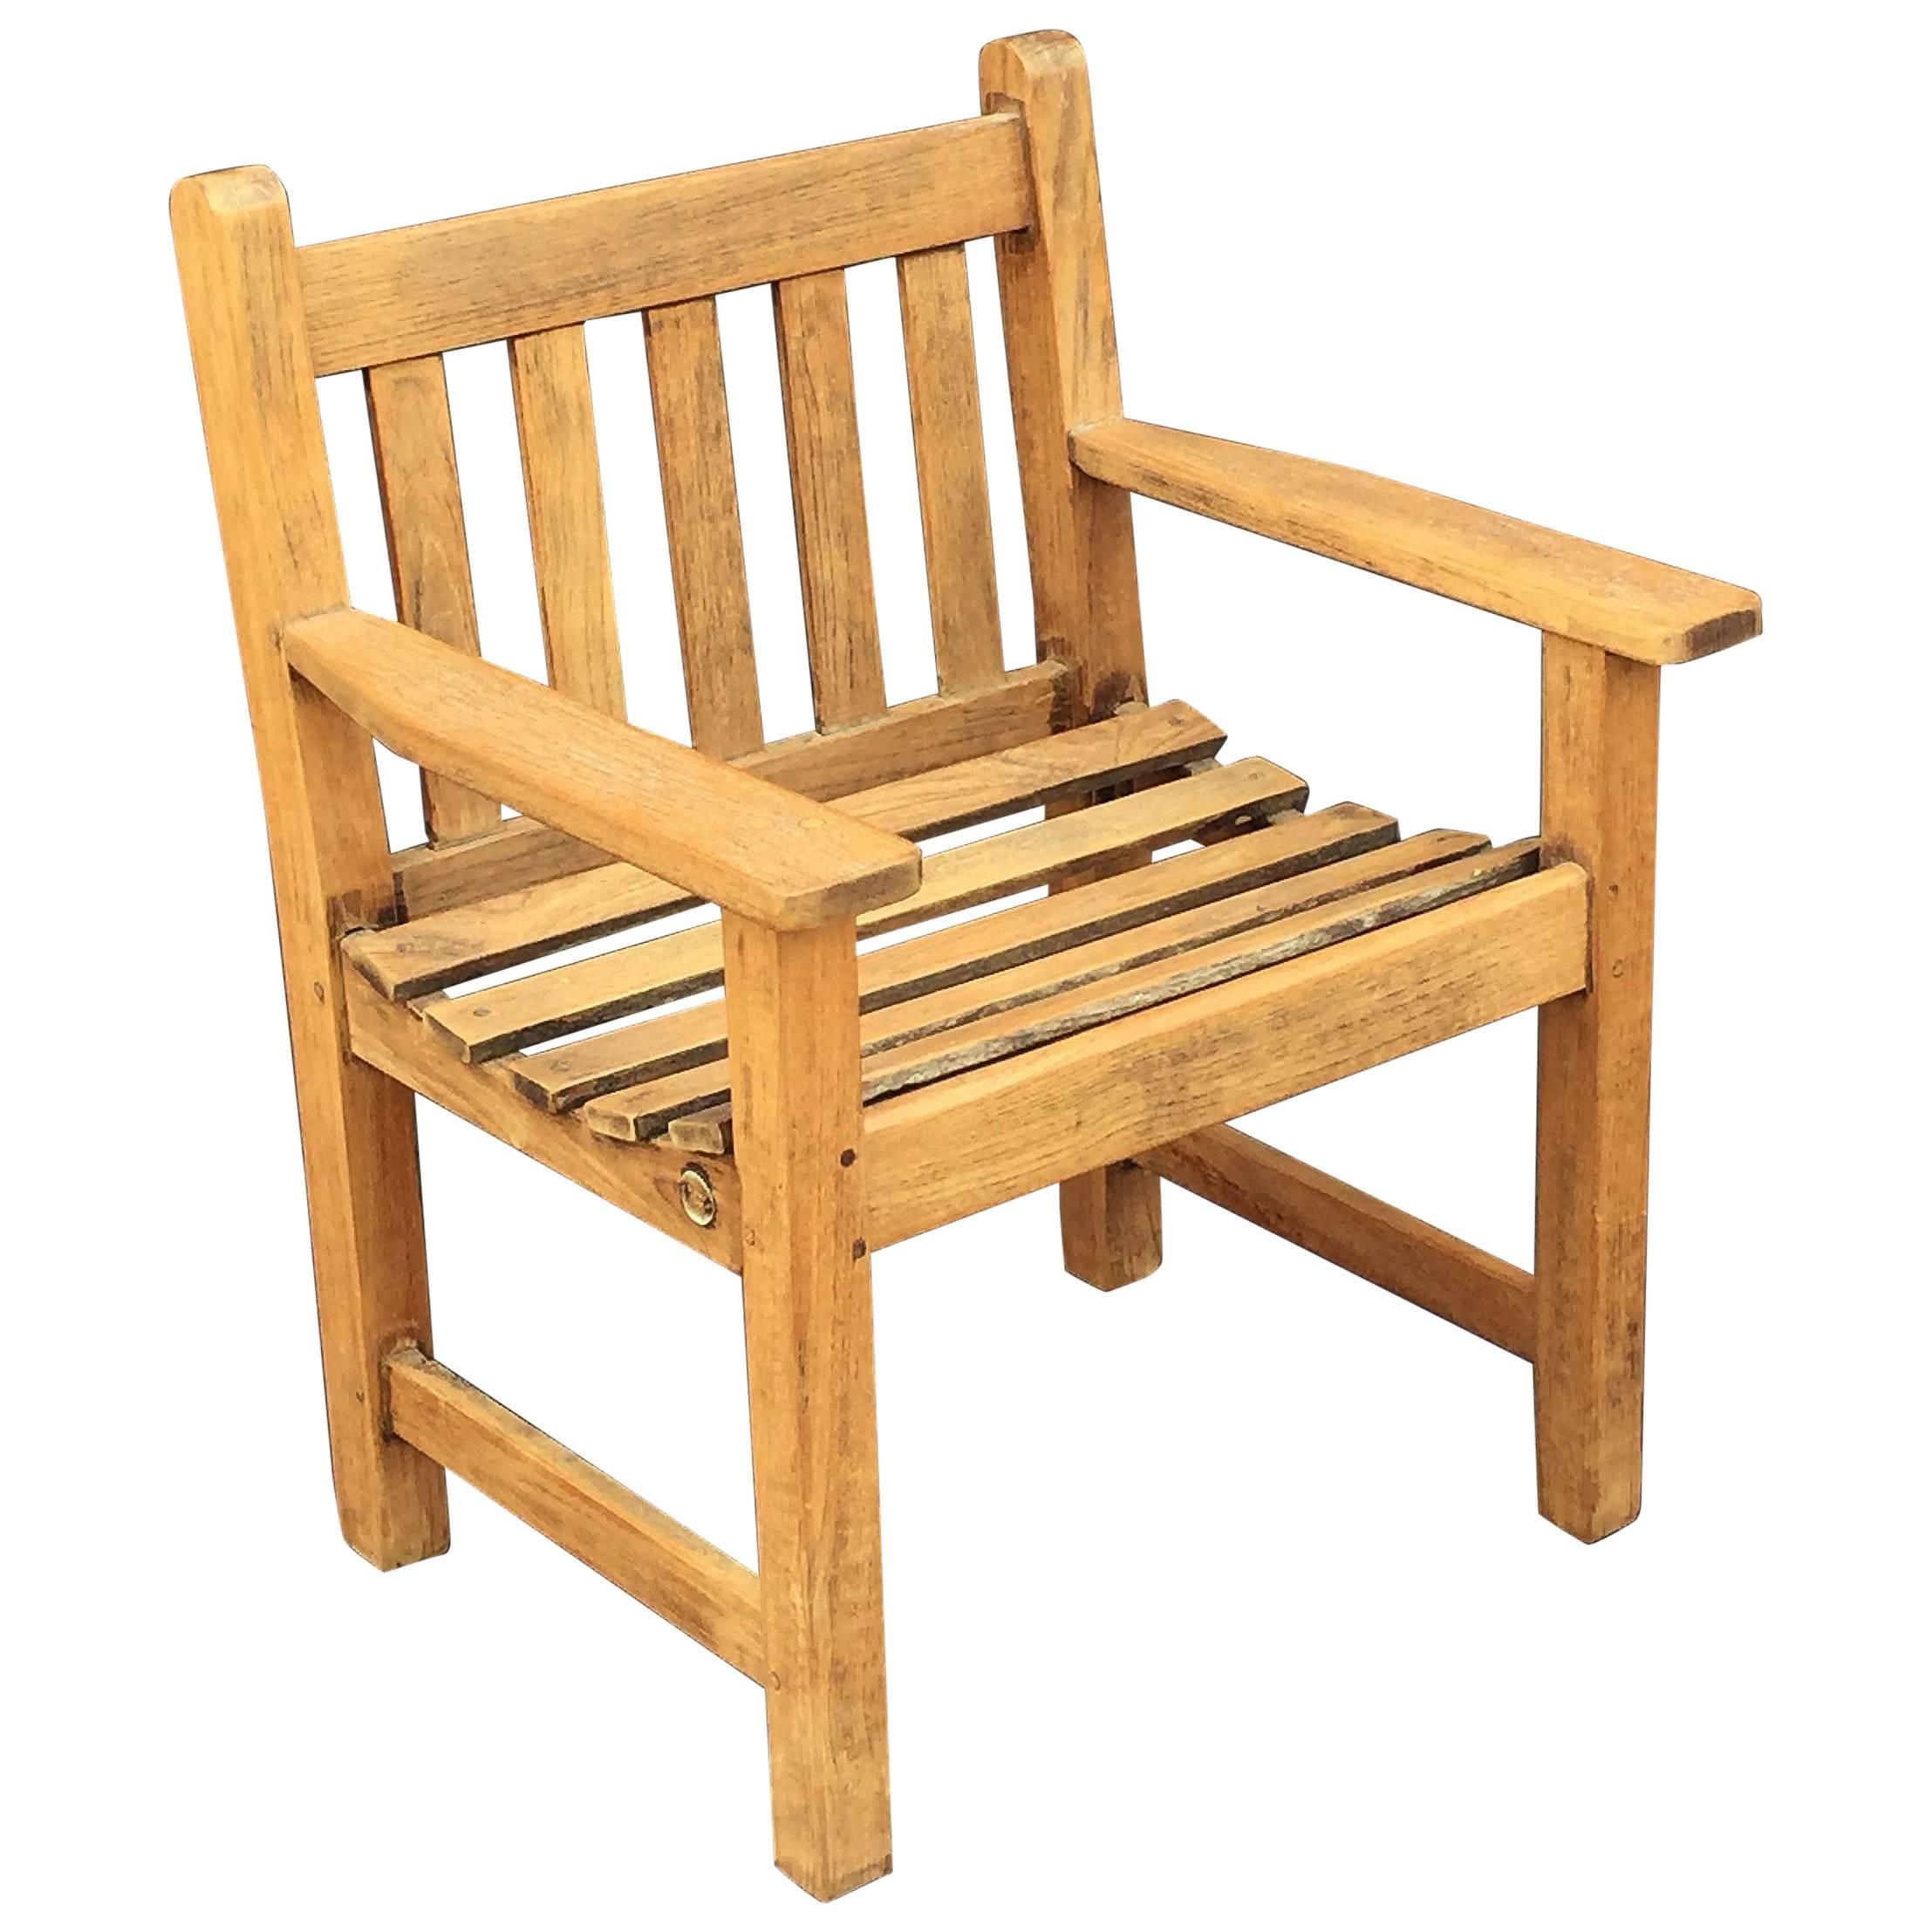 English Lister Chair of Teak for the Garden and Patio